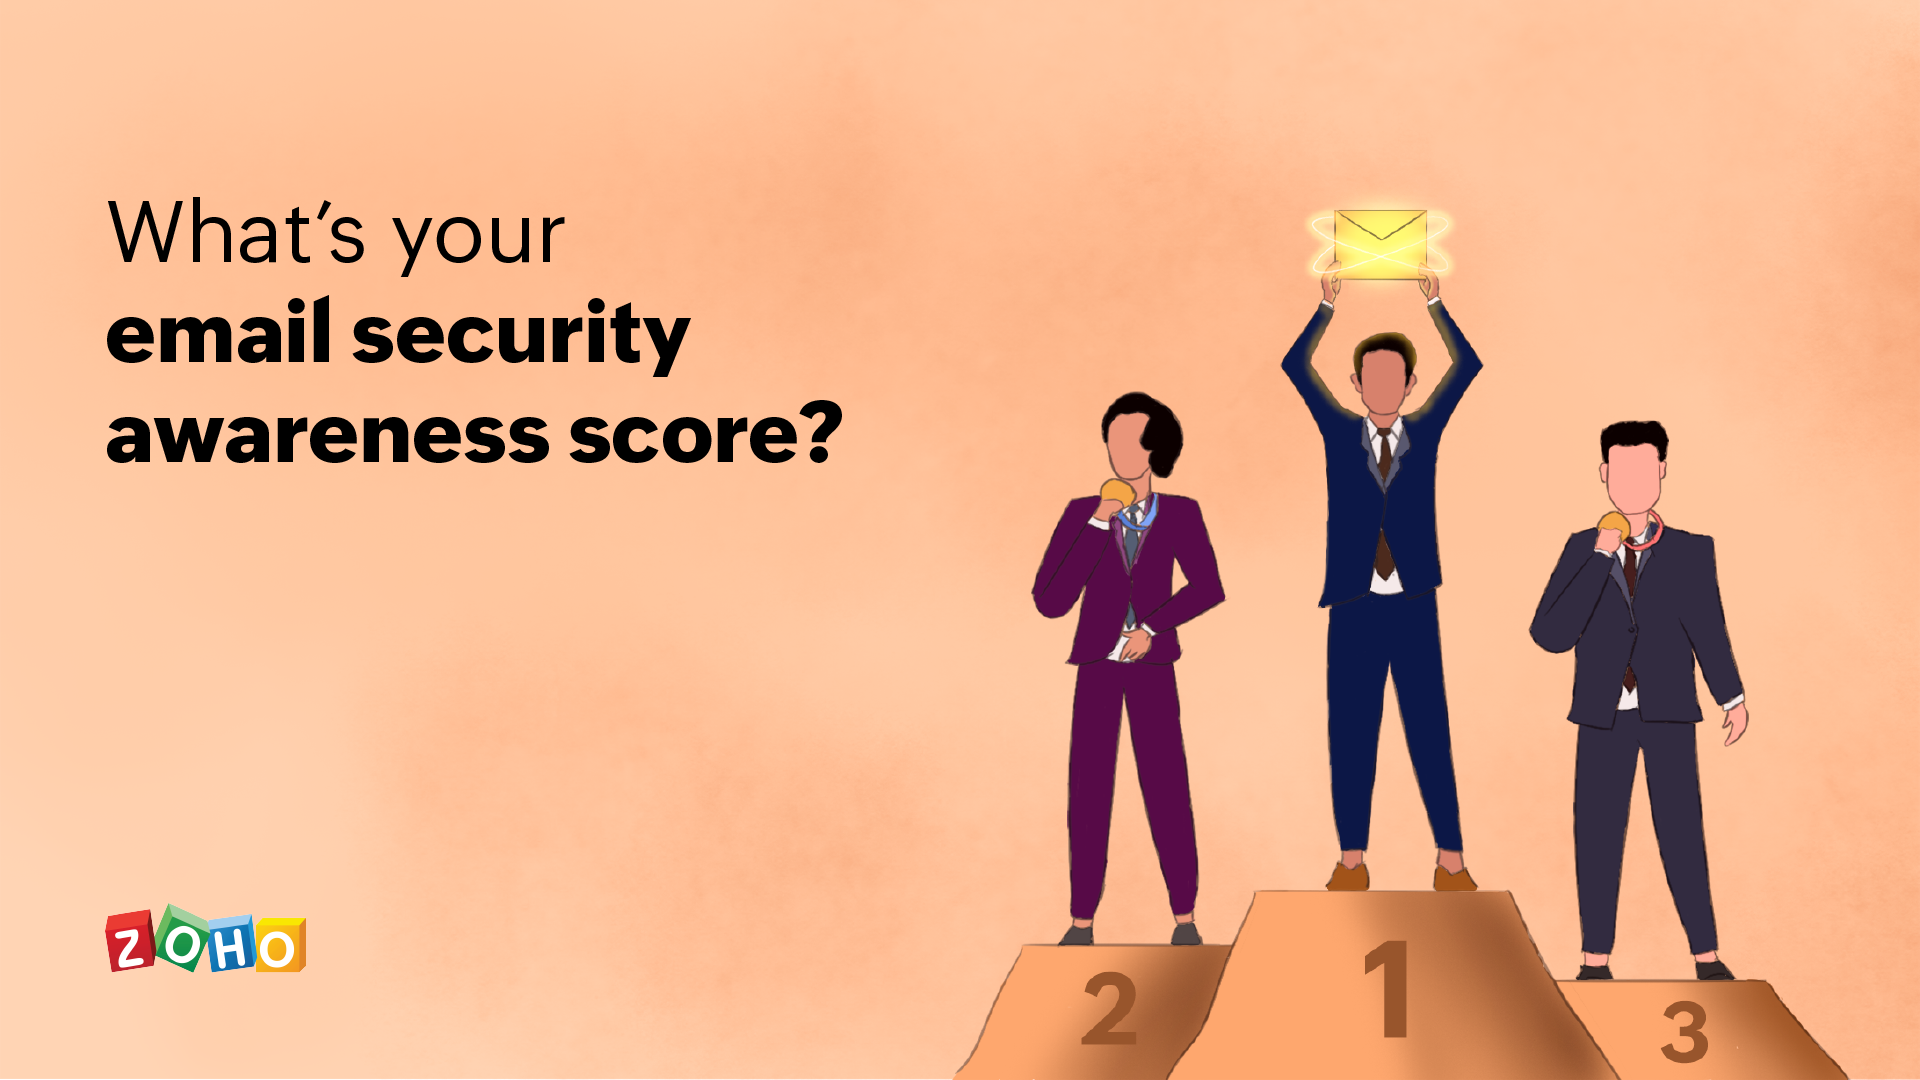 What’s your email security awareness score?